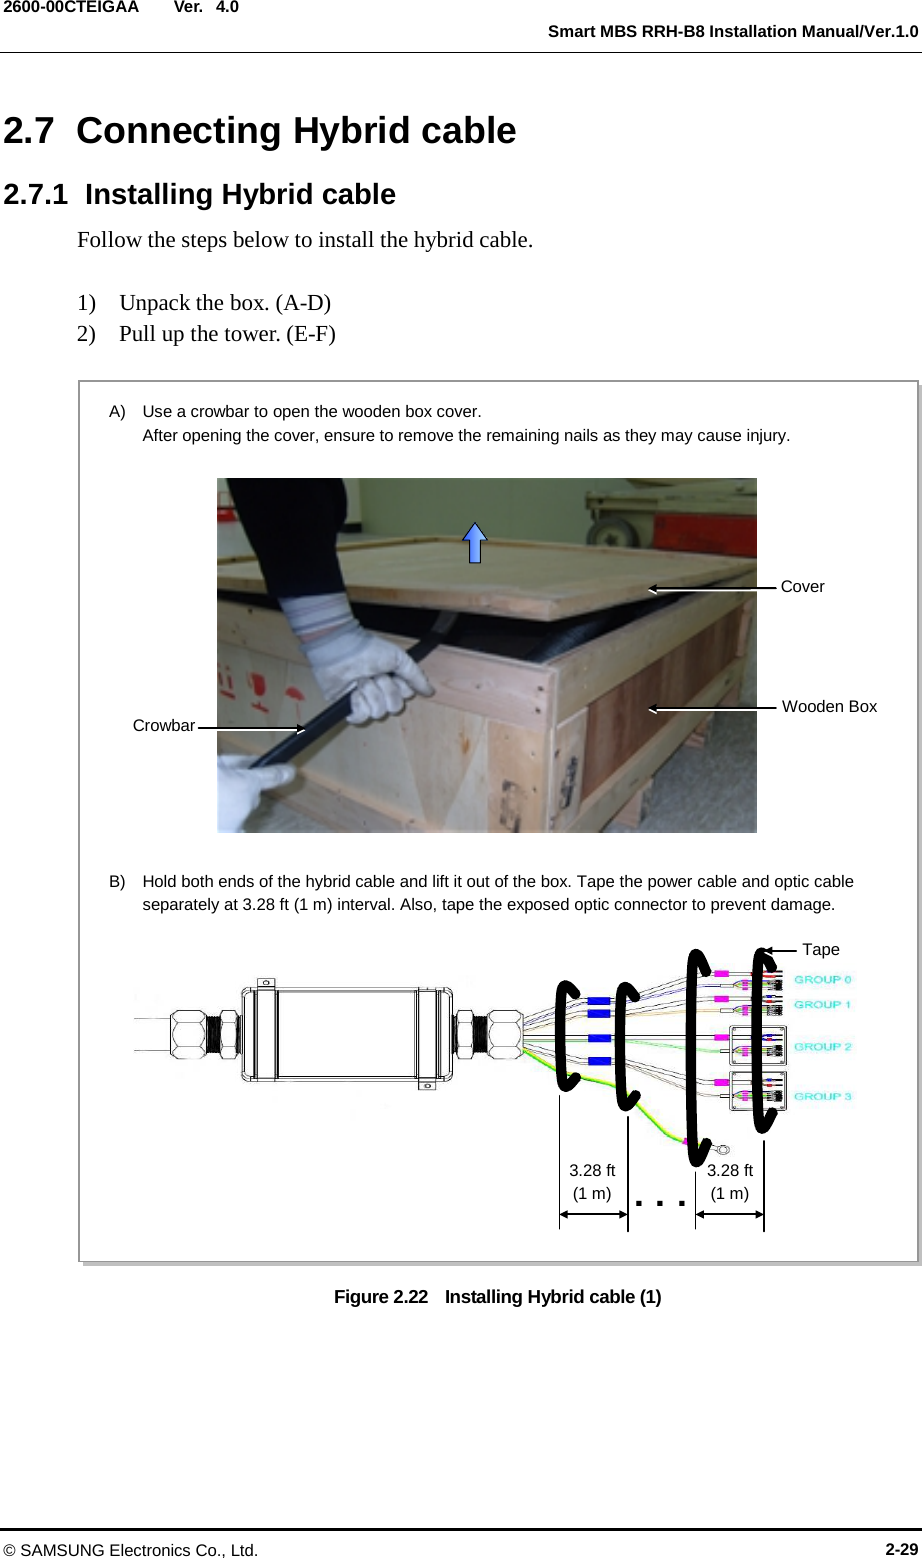  Ver.   Smart MBS RRH-B8 Installation Manual/Ver.1.0 2600-00CTEIGAA 4.0 2.7  Connecting Hybrid cable 2.7.1  Installing Hybrid cable Follow the steps below to install the hybrid cable.  1)    Unpack the box. (A-D) 2)    Pull up the tower. (E-F)  Figure 2.22    Installing Hybrid cable (1)  A)  Use a crowbar to open the wooden box cover.   After opening the cover, ensure to remove the remaining nails as they may cause injury. B)  Hold both ends of the hybrid cable and lift it out of the box. Tape the power cable and optic cable separately at 3.28 ft (1 m) interval. Also, tape the exposed optic connector to prevent damage. 3.28 ft (1 m) ... Tape 3.28 ft (1 m) Cover Crowbar Wooden Box © SAMSUNG Electronics Co., Ltd. 2-29 